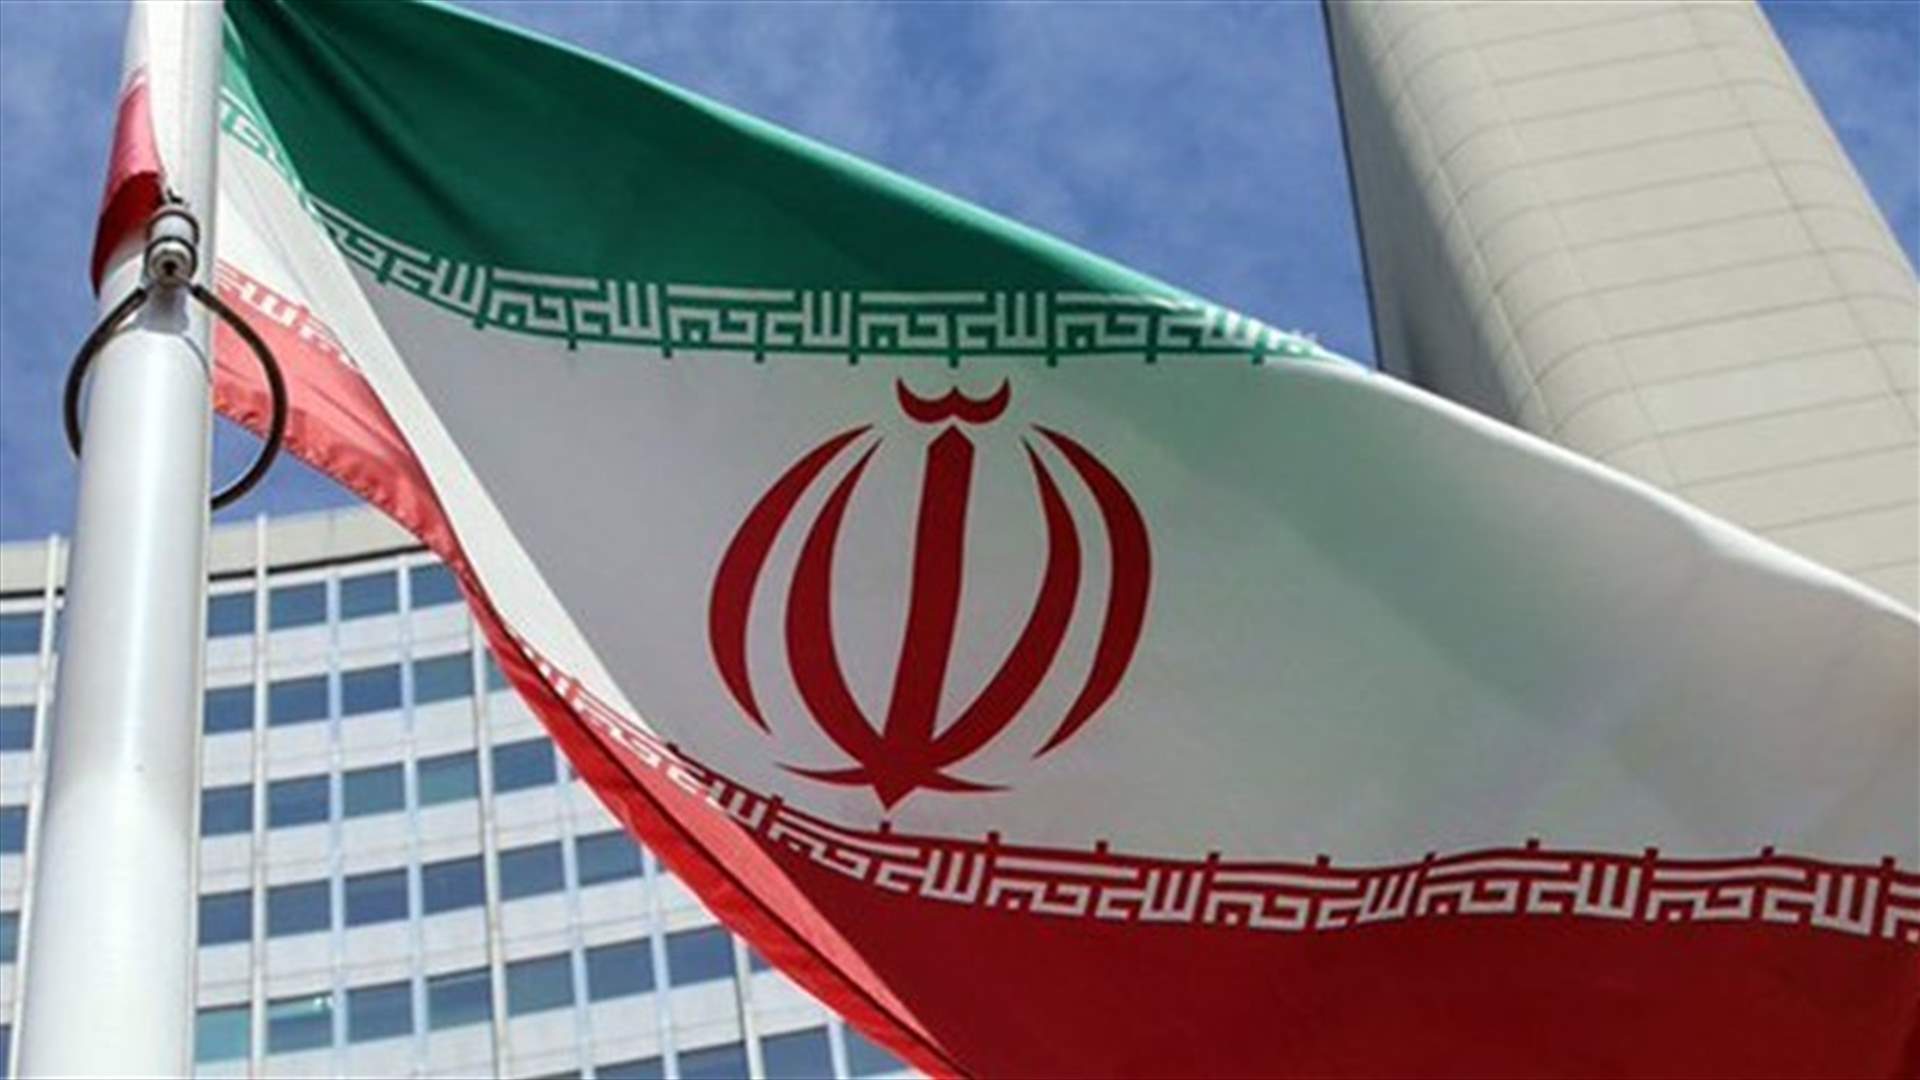 Iran says will respond in kind if US tries to block oil exports